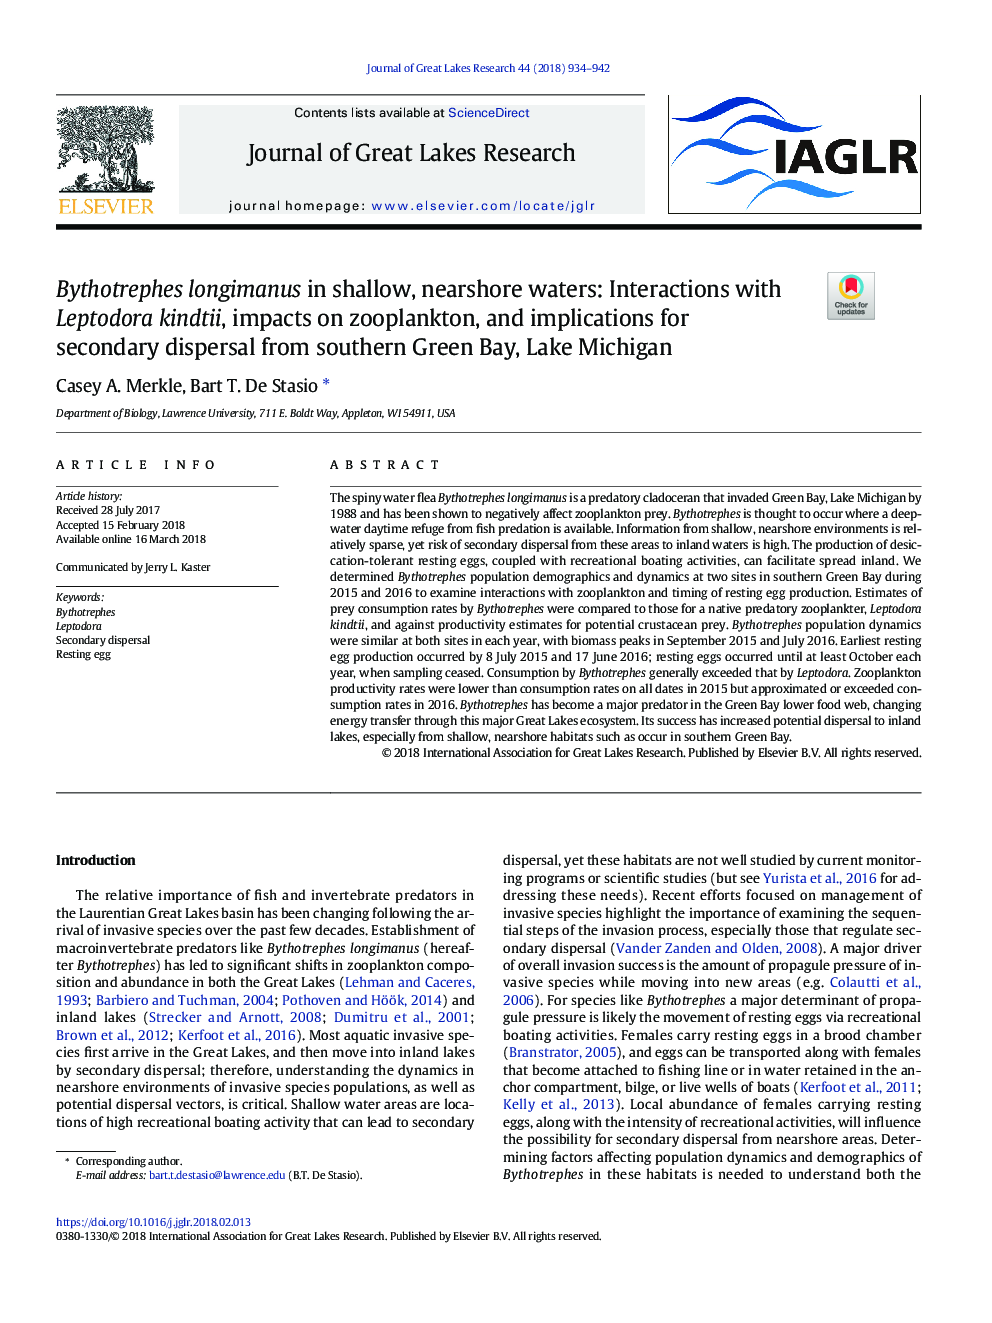 Bythotrephes longimanus in shallow, nearshore waters: Interactions with Leptodora kindtii, impacts on zooplankton, and implications for secondary dispersal from southern Green Bay, Lake Michigan